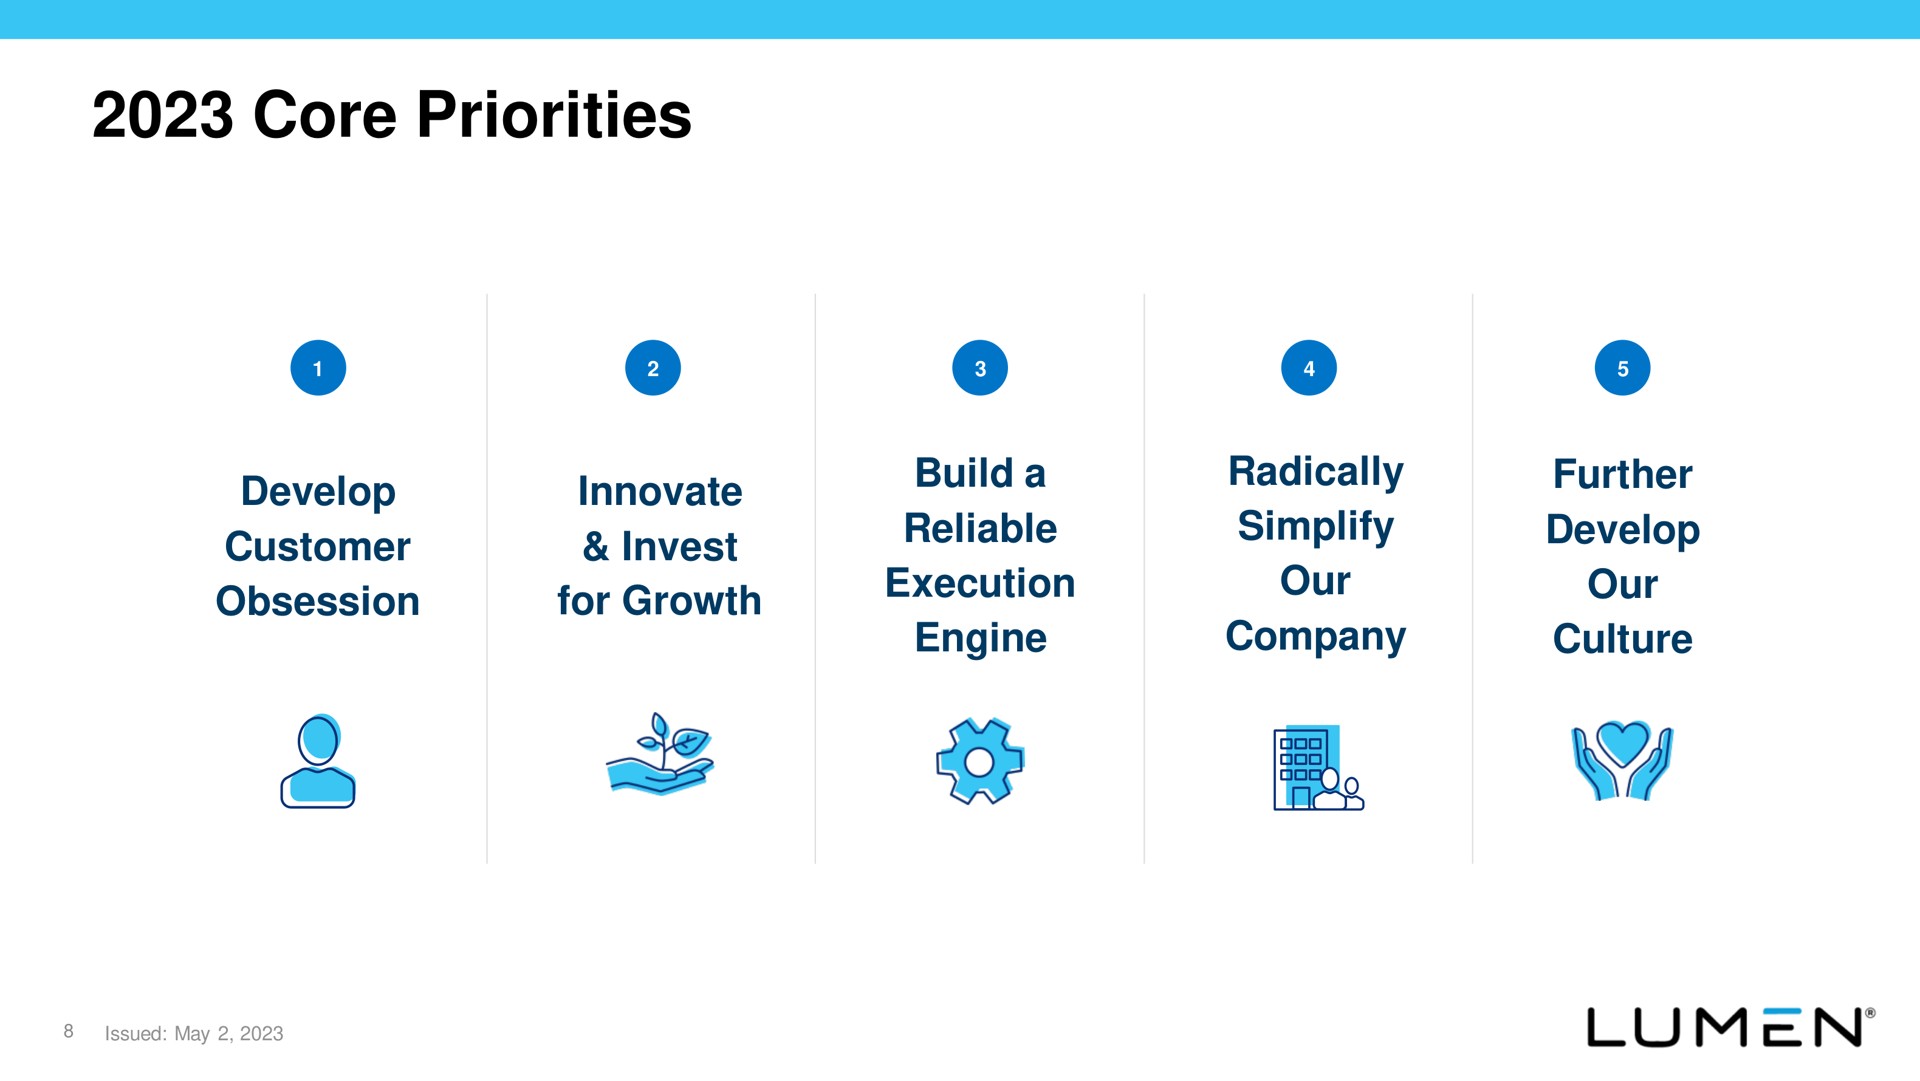 core priorities develop customer obsession innovate invest for growth build a reliable execution engine radically simplify our company further develop our culture as | Lumen